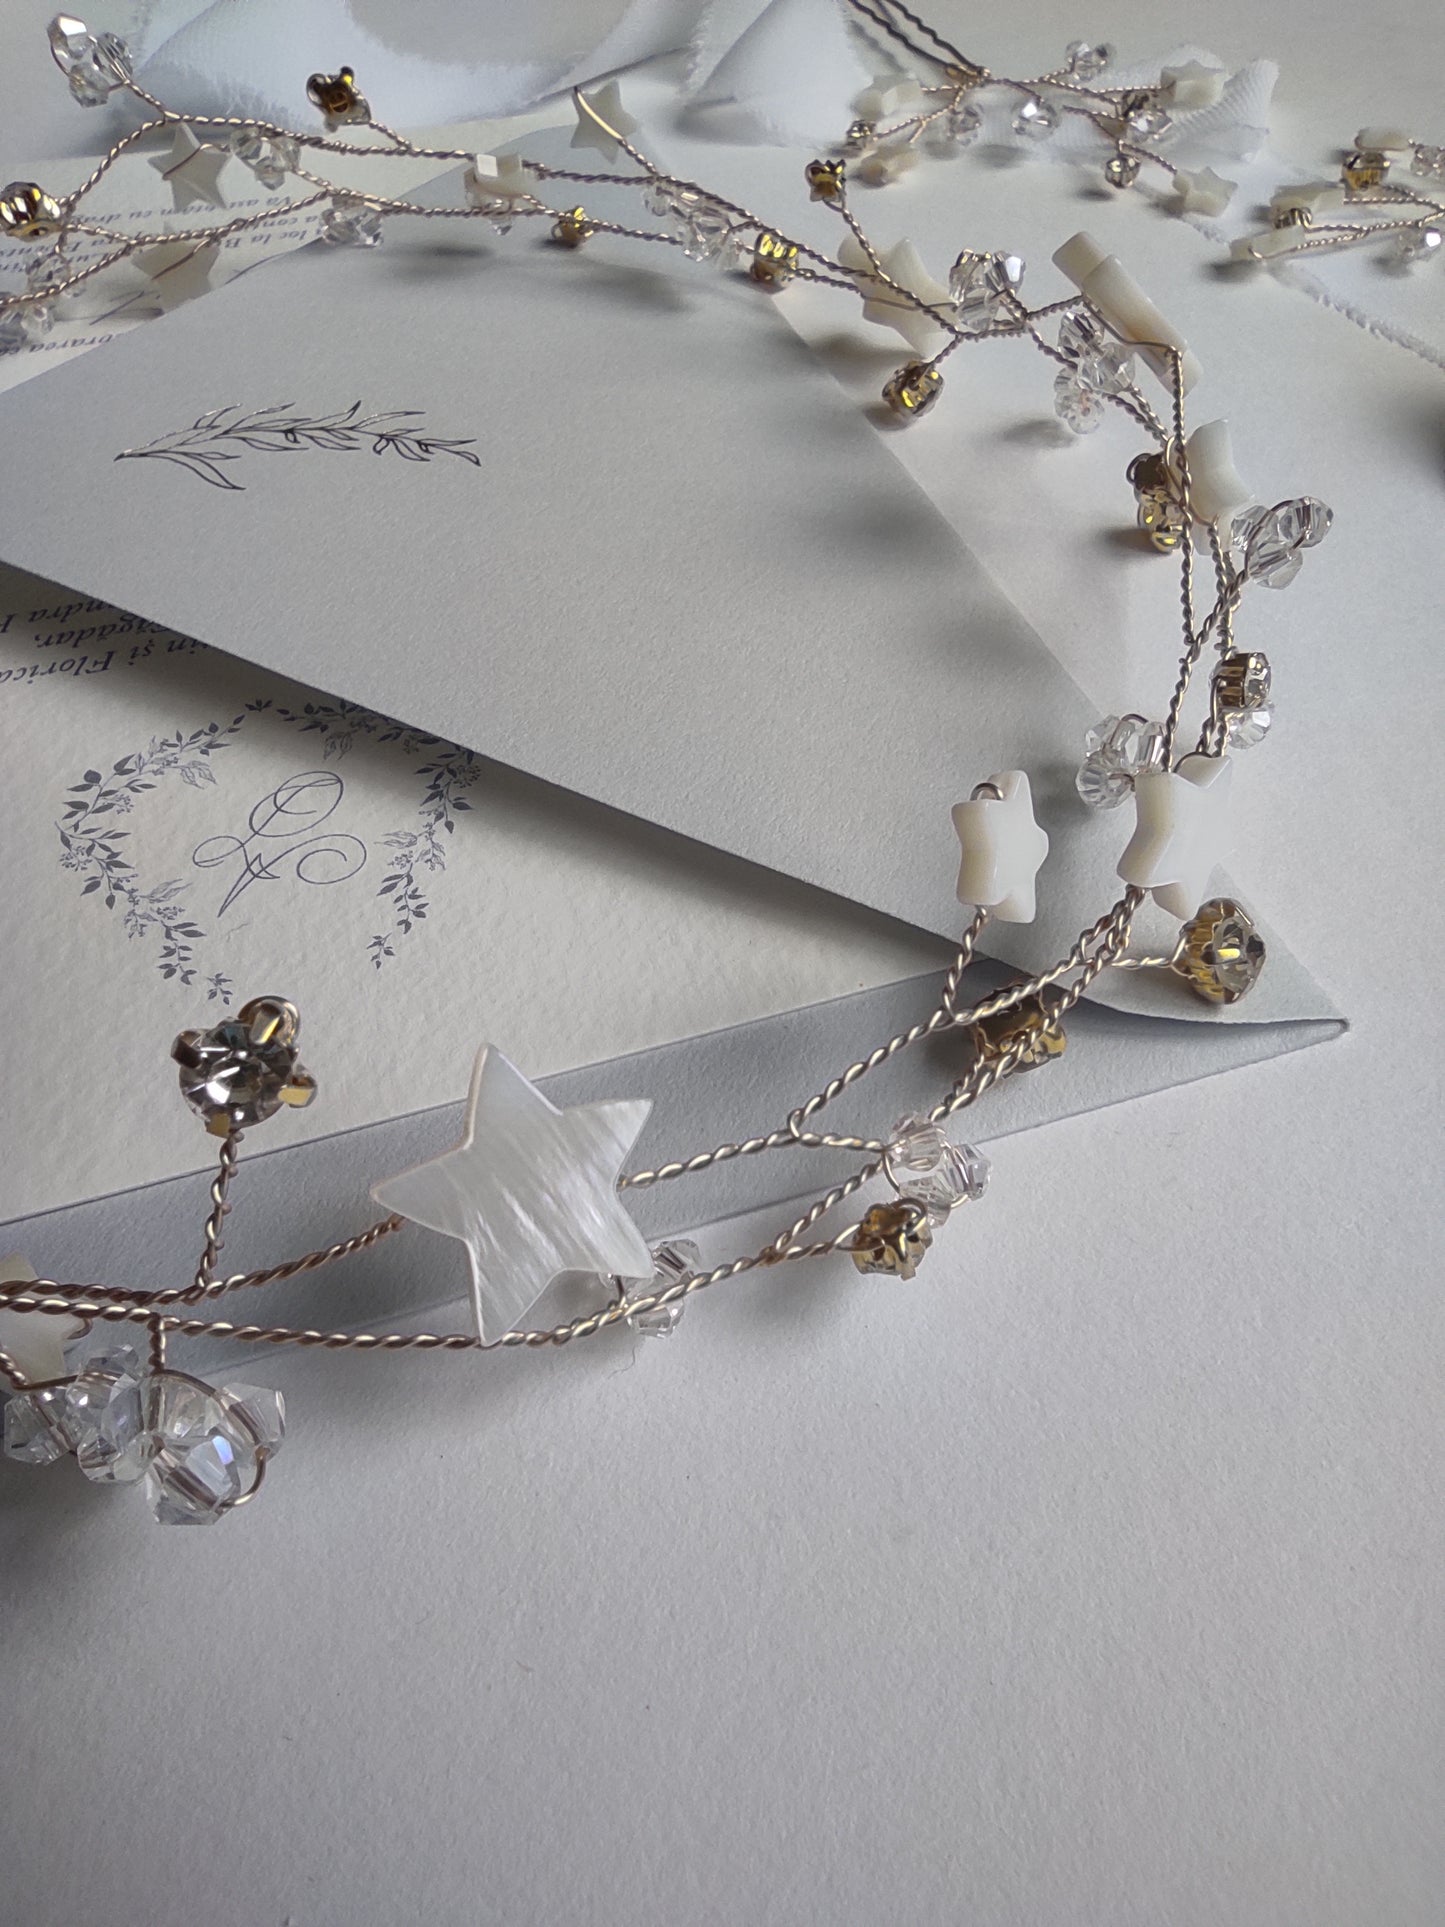 Bridal hair vine STARLEY | Bridal hair accessory with mother of pearl stars | Wedding halo